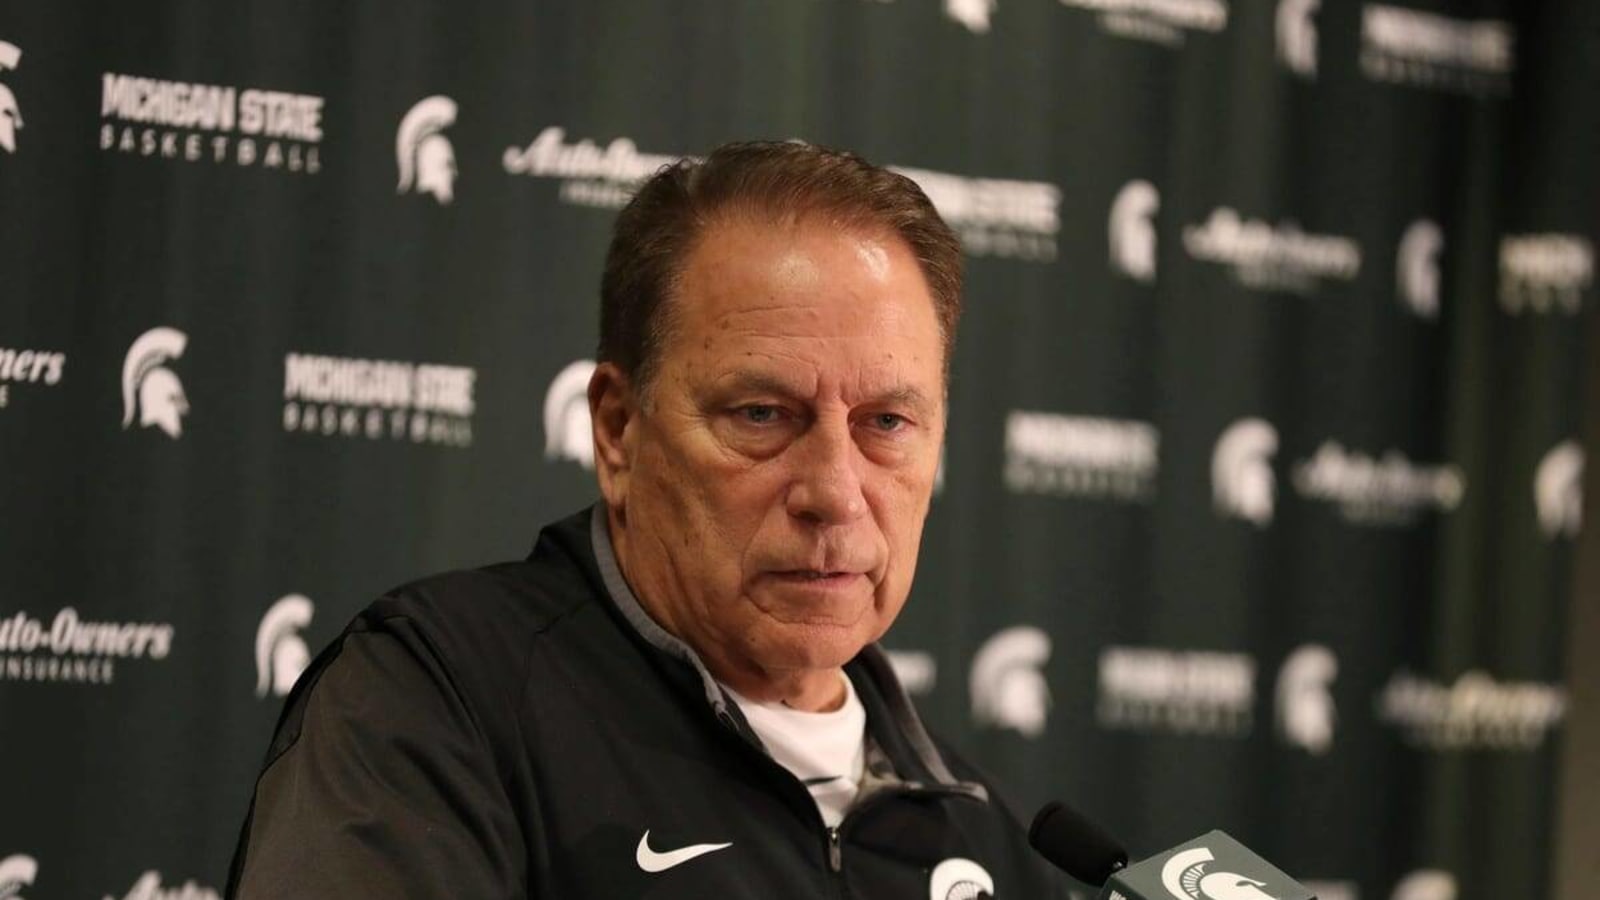 Tom Izzo: "I get tired of Michigan State always looking like the bad guy" in regards to U-M tunnel incident